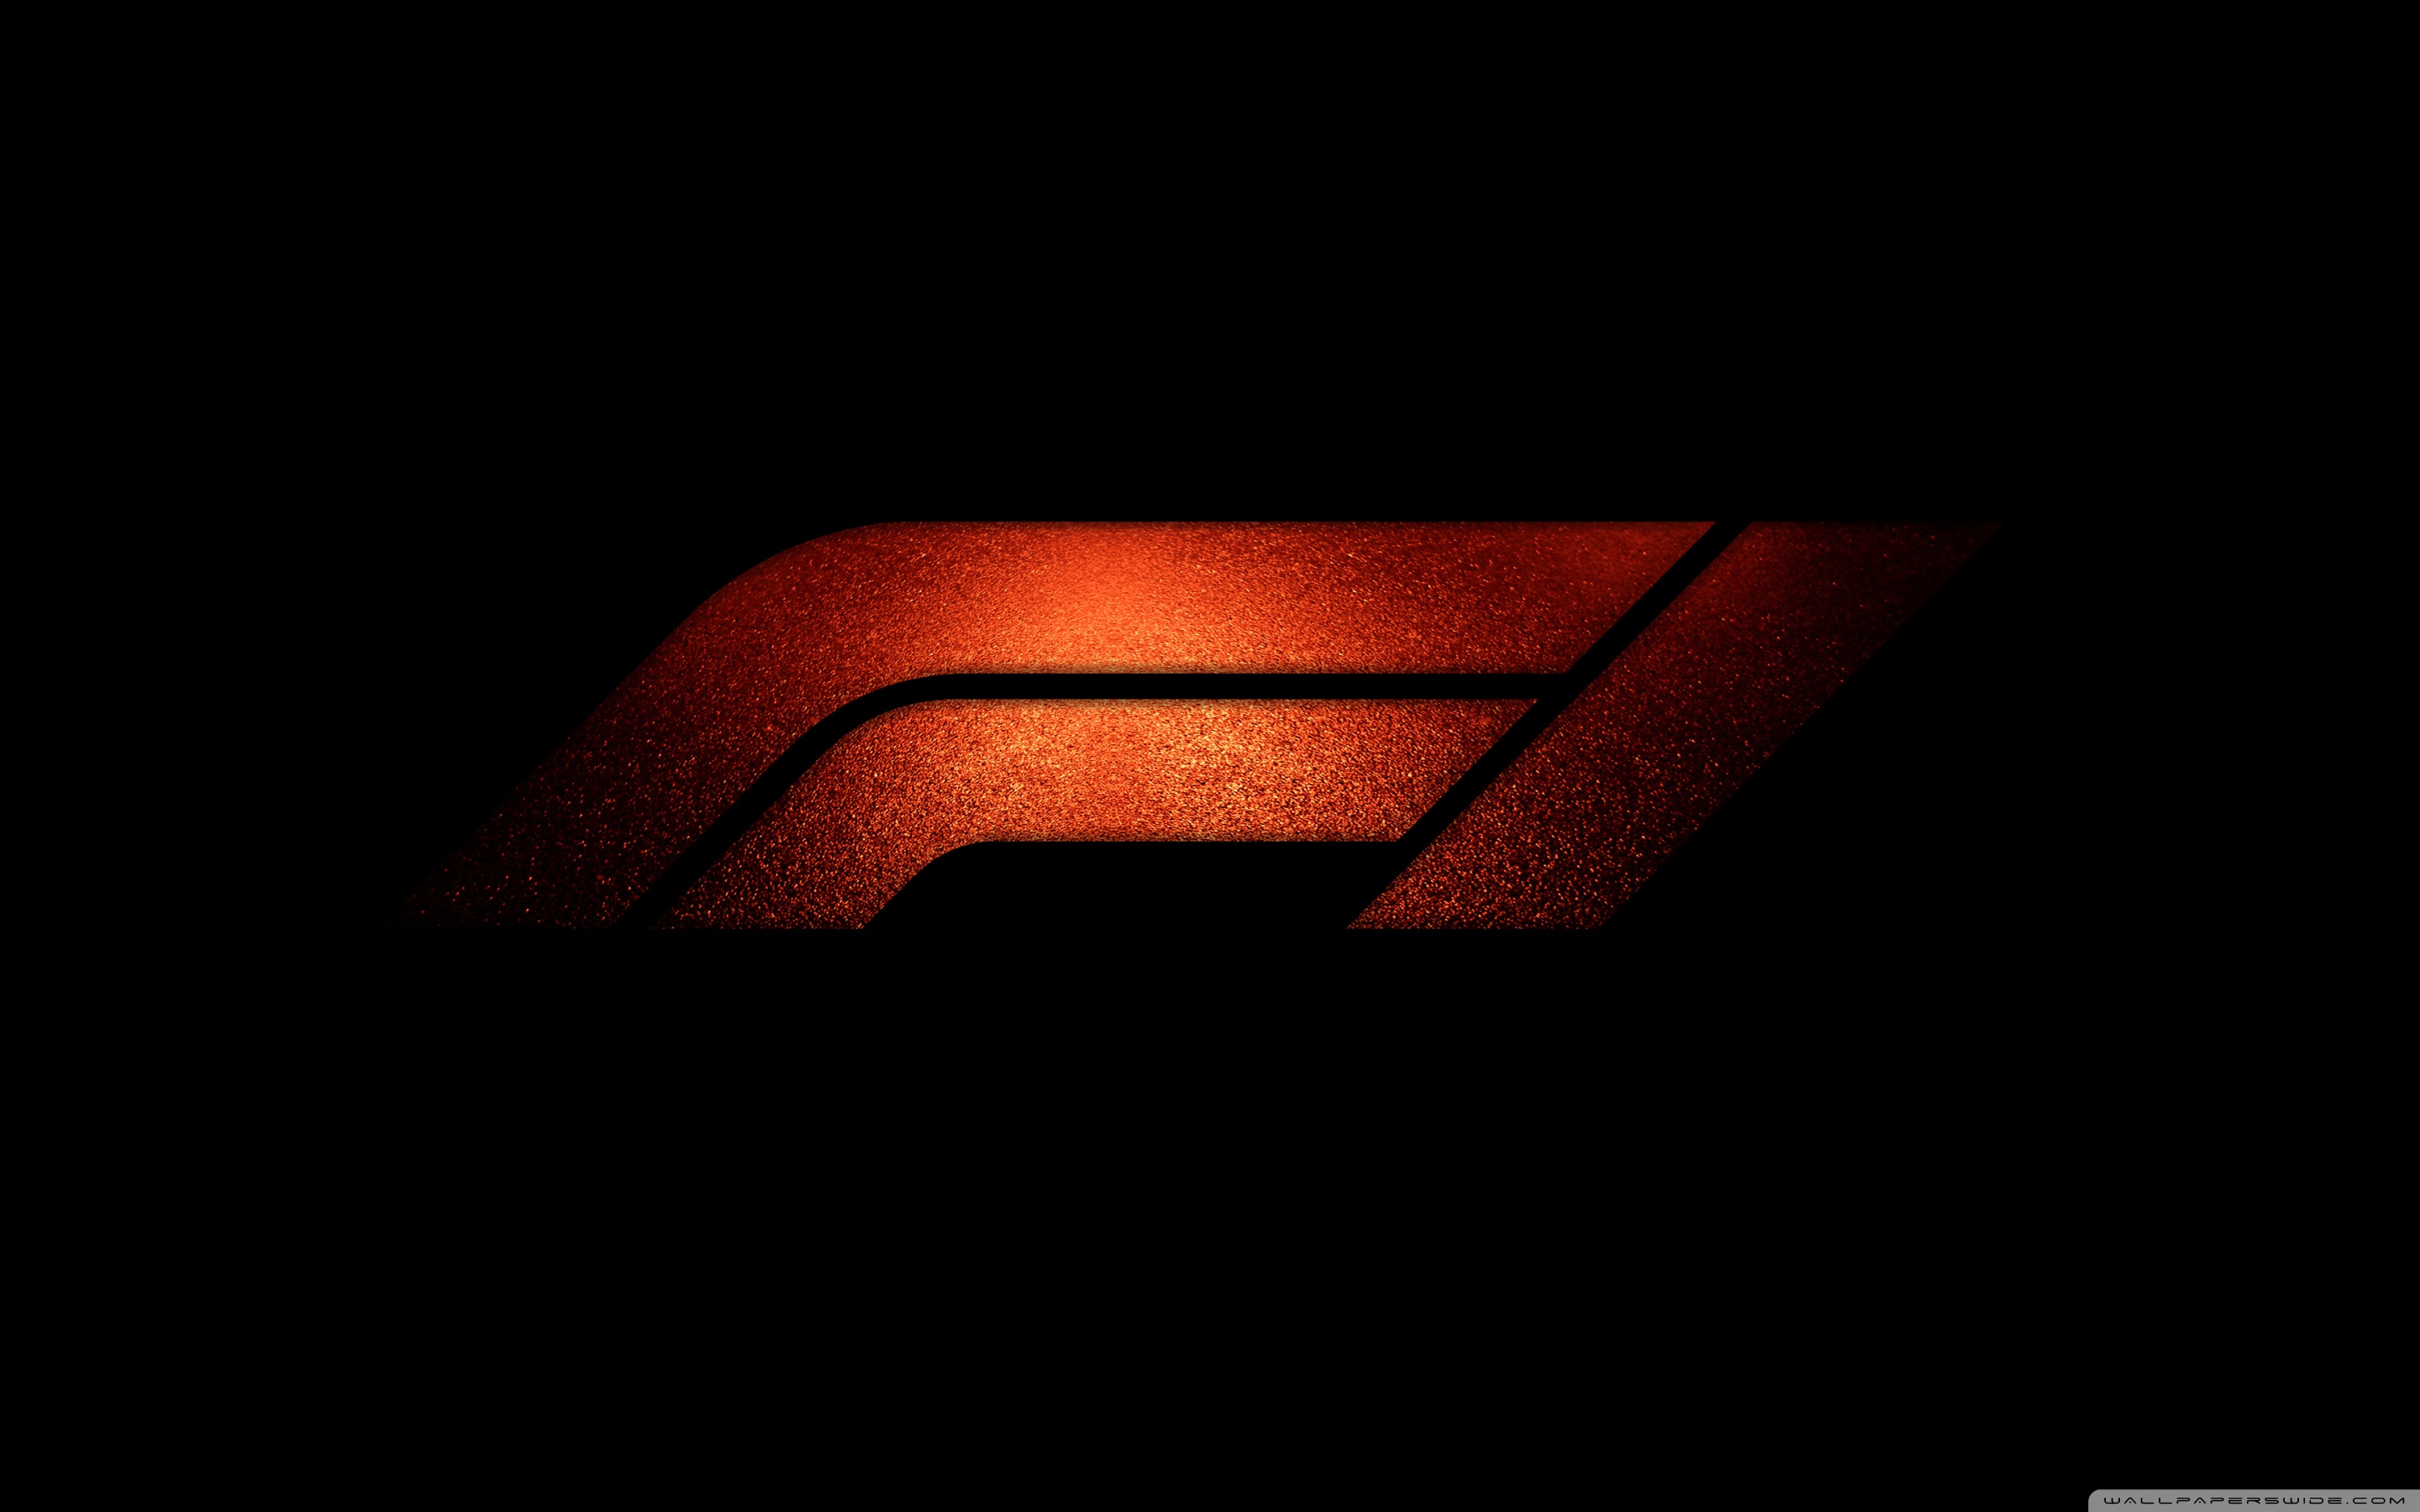 F1 Logo Wallpapers